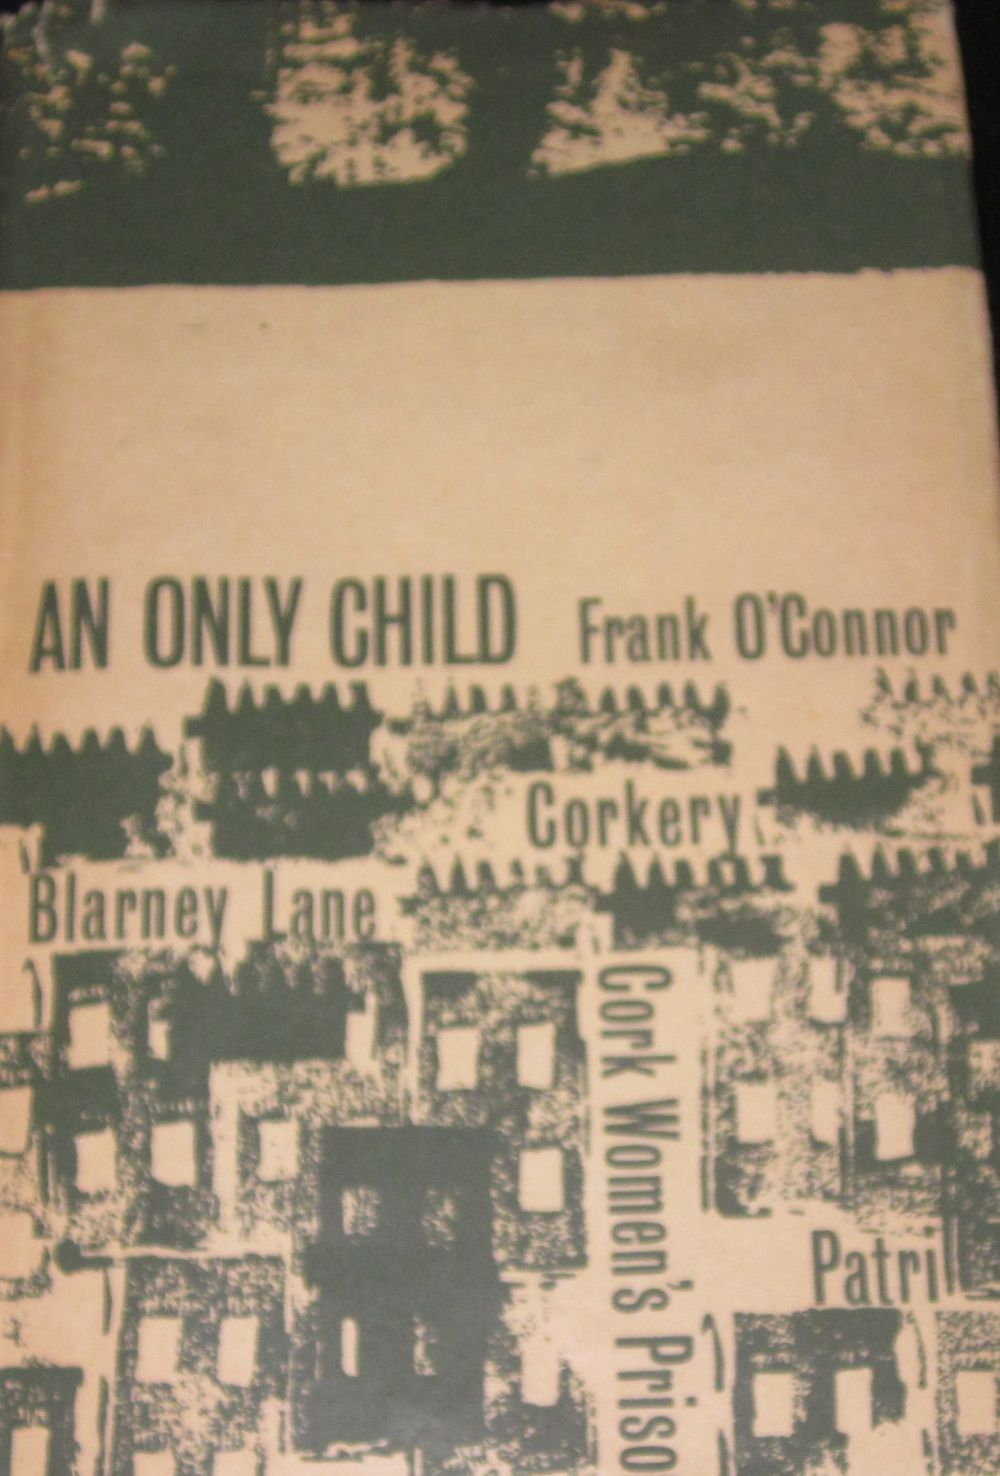 O'CONNOR, FRANK - An Only Child